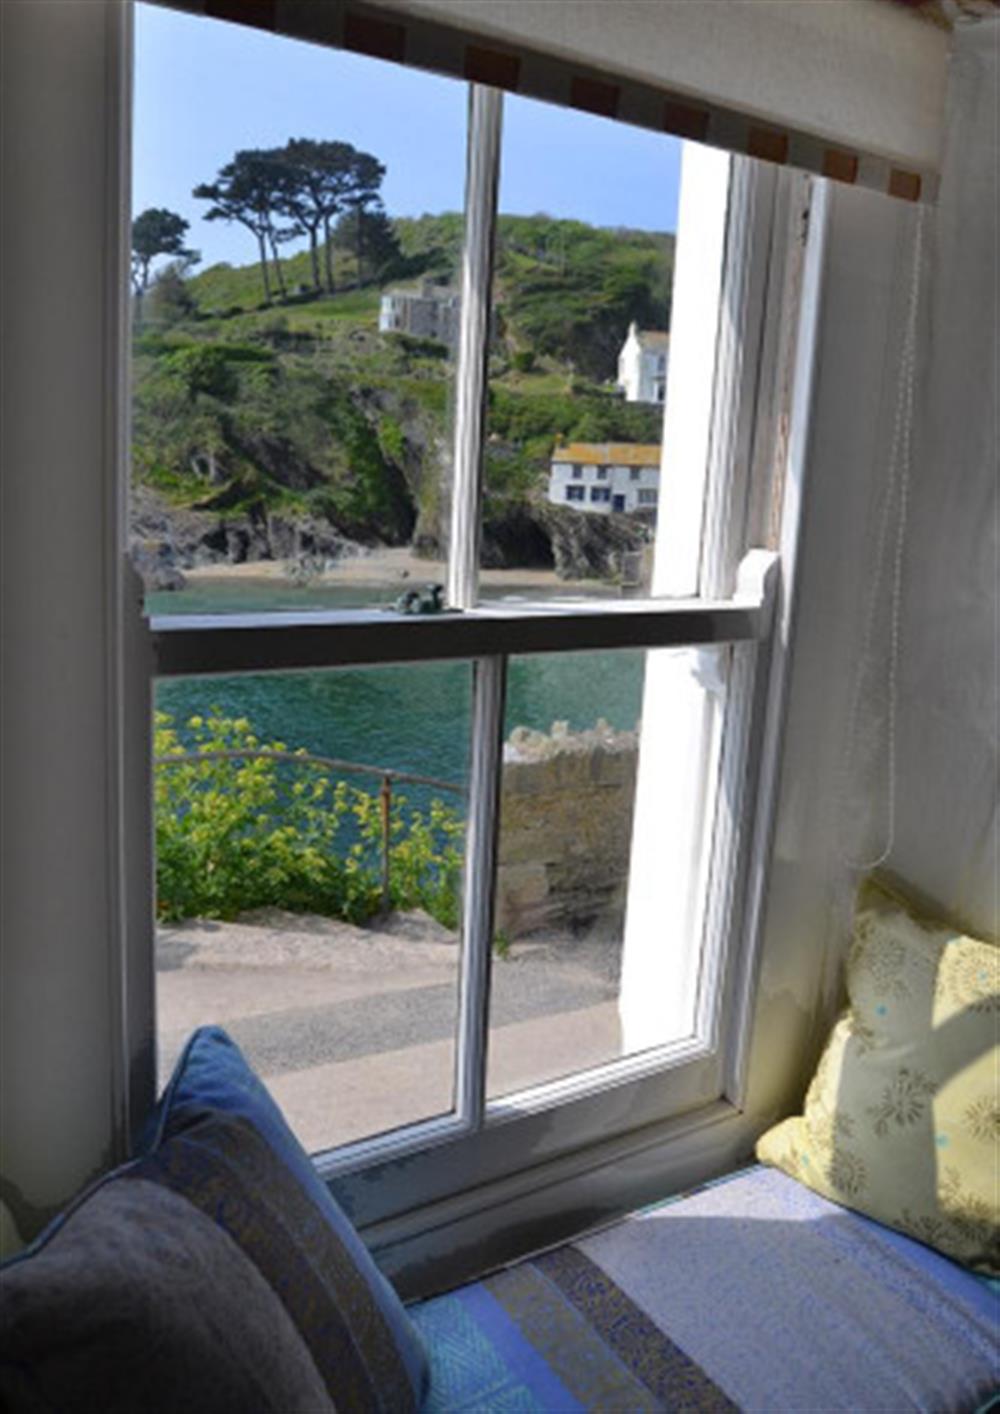 The beach, seen through the dining room window at The Cobbles in Polperro